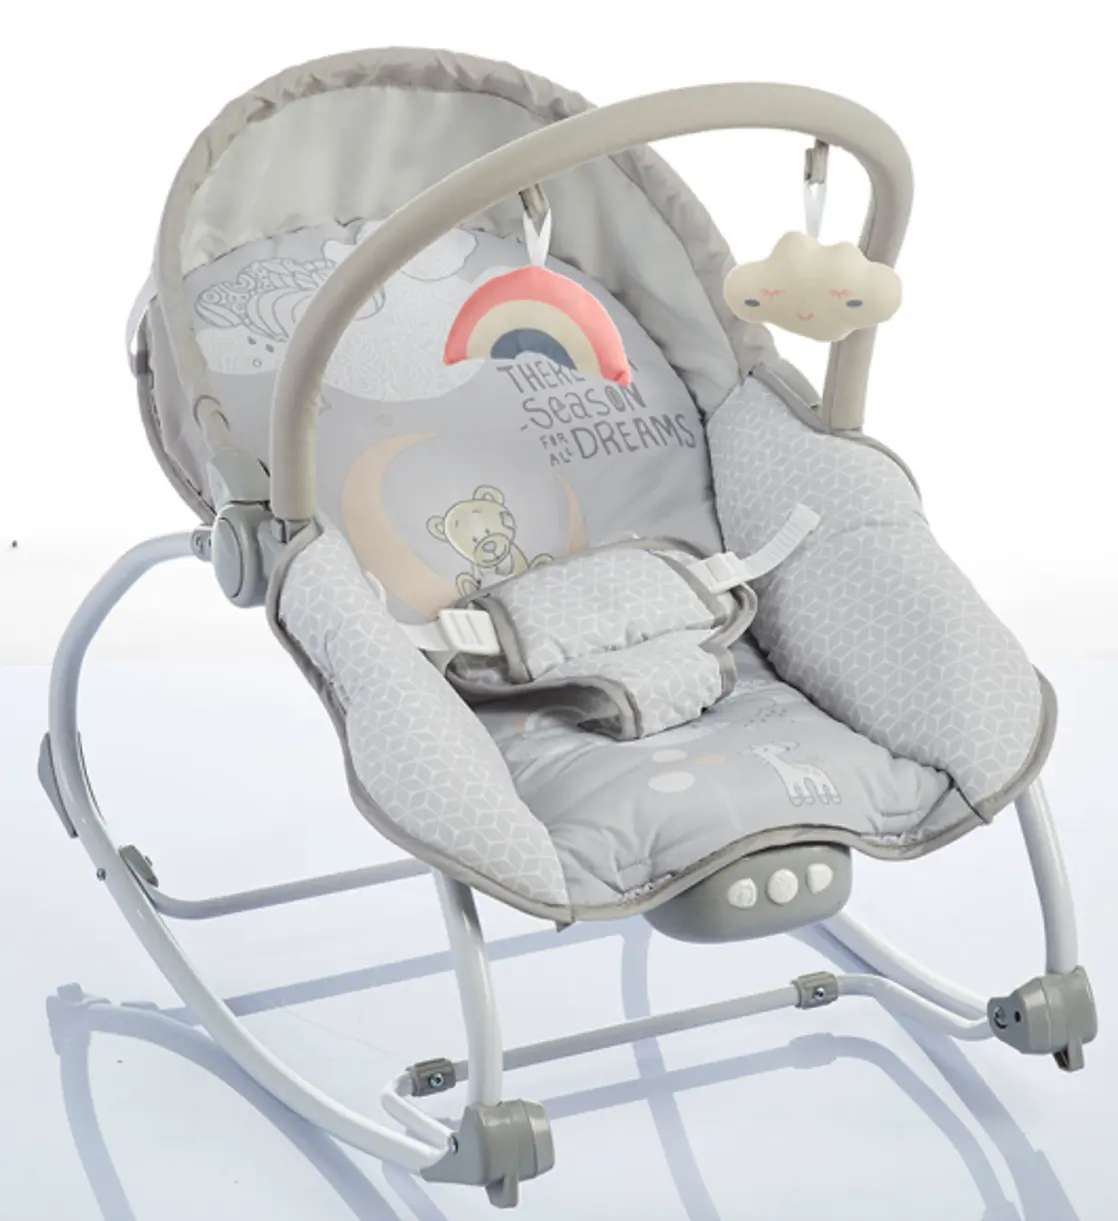 Brightbebe Baby Bouncer Rocker Portable Bouncing Baby Seat with Music and Vibrations